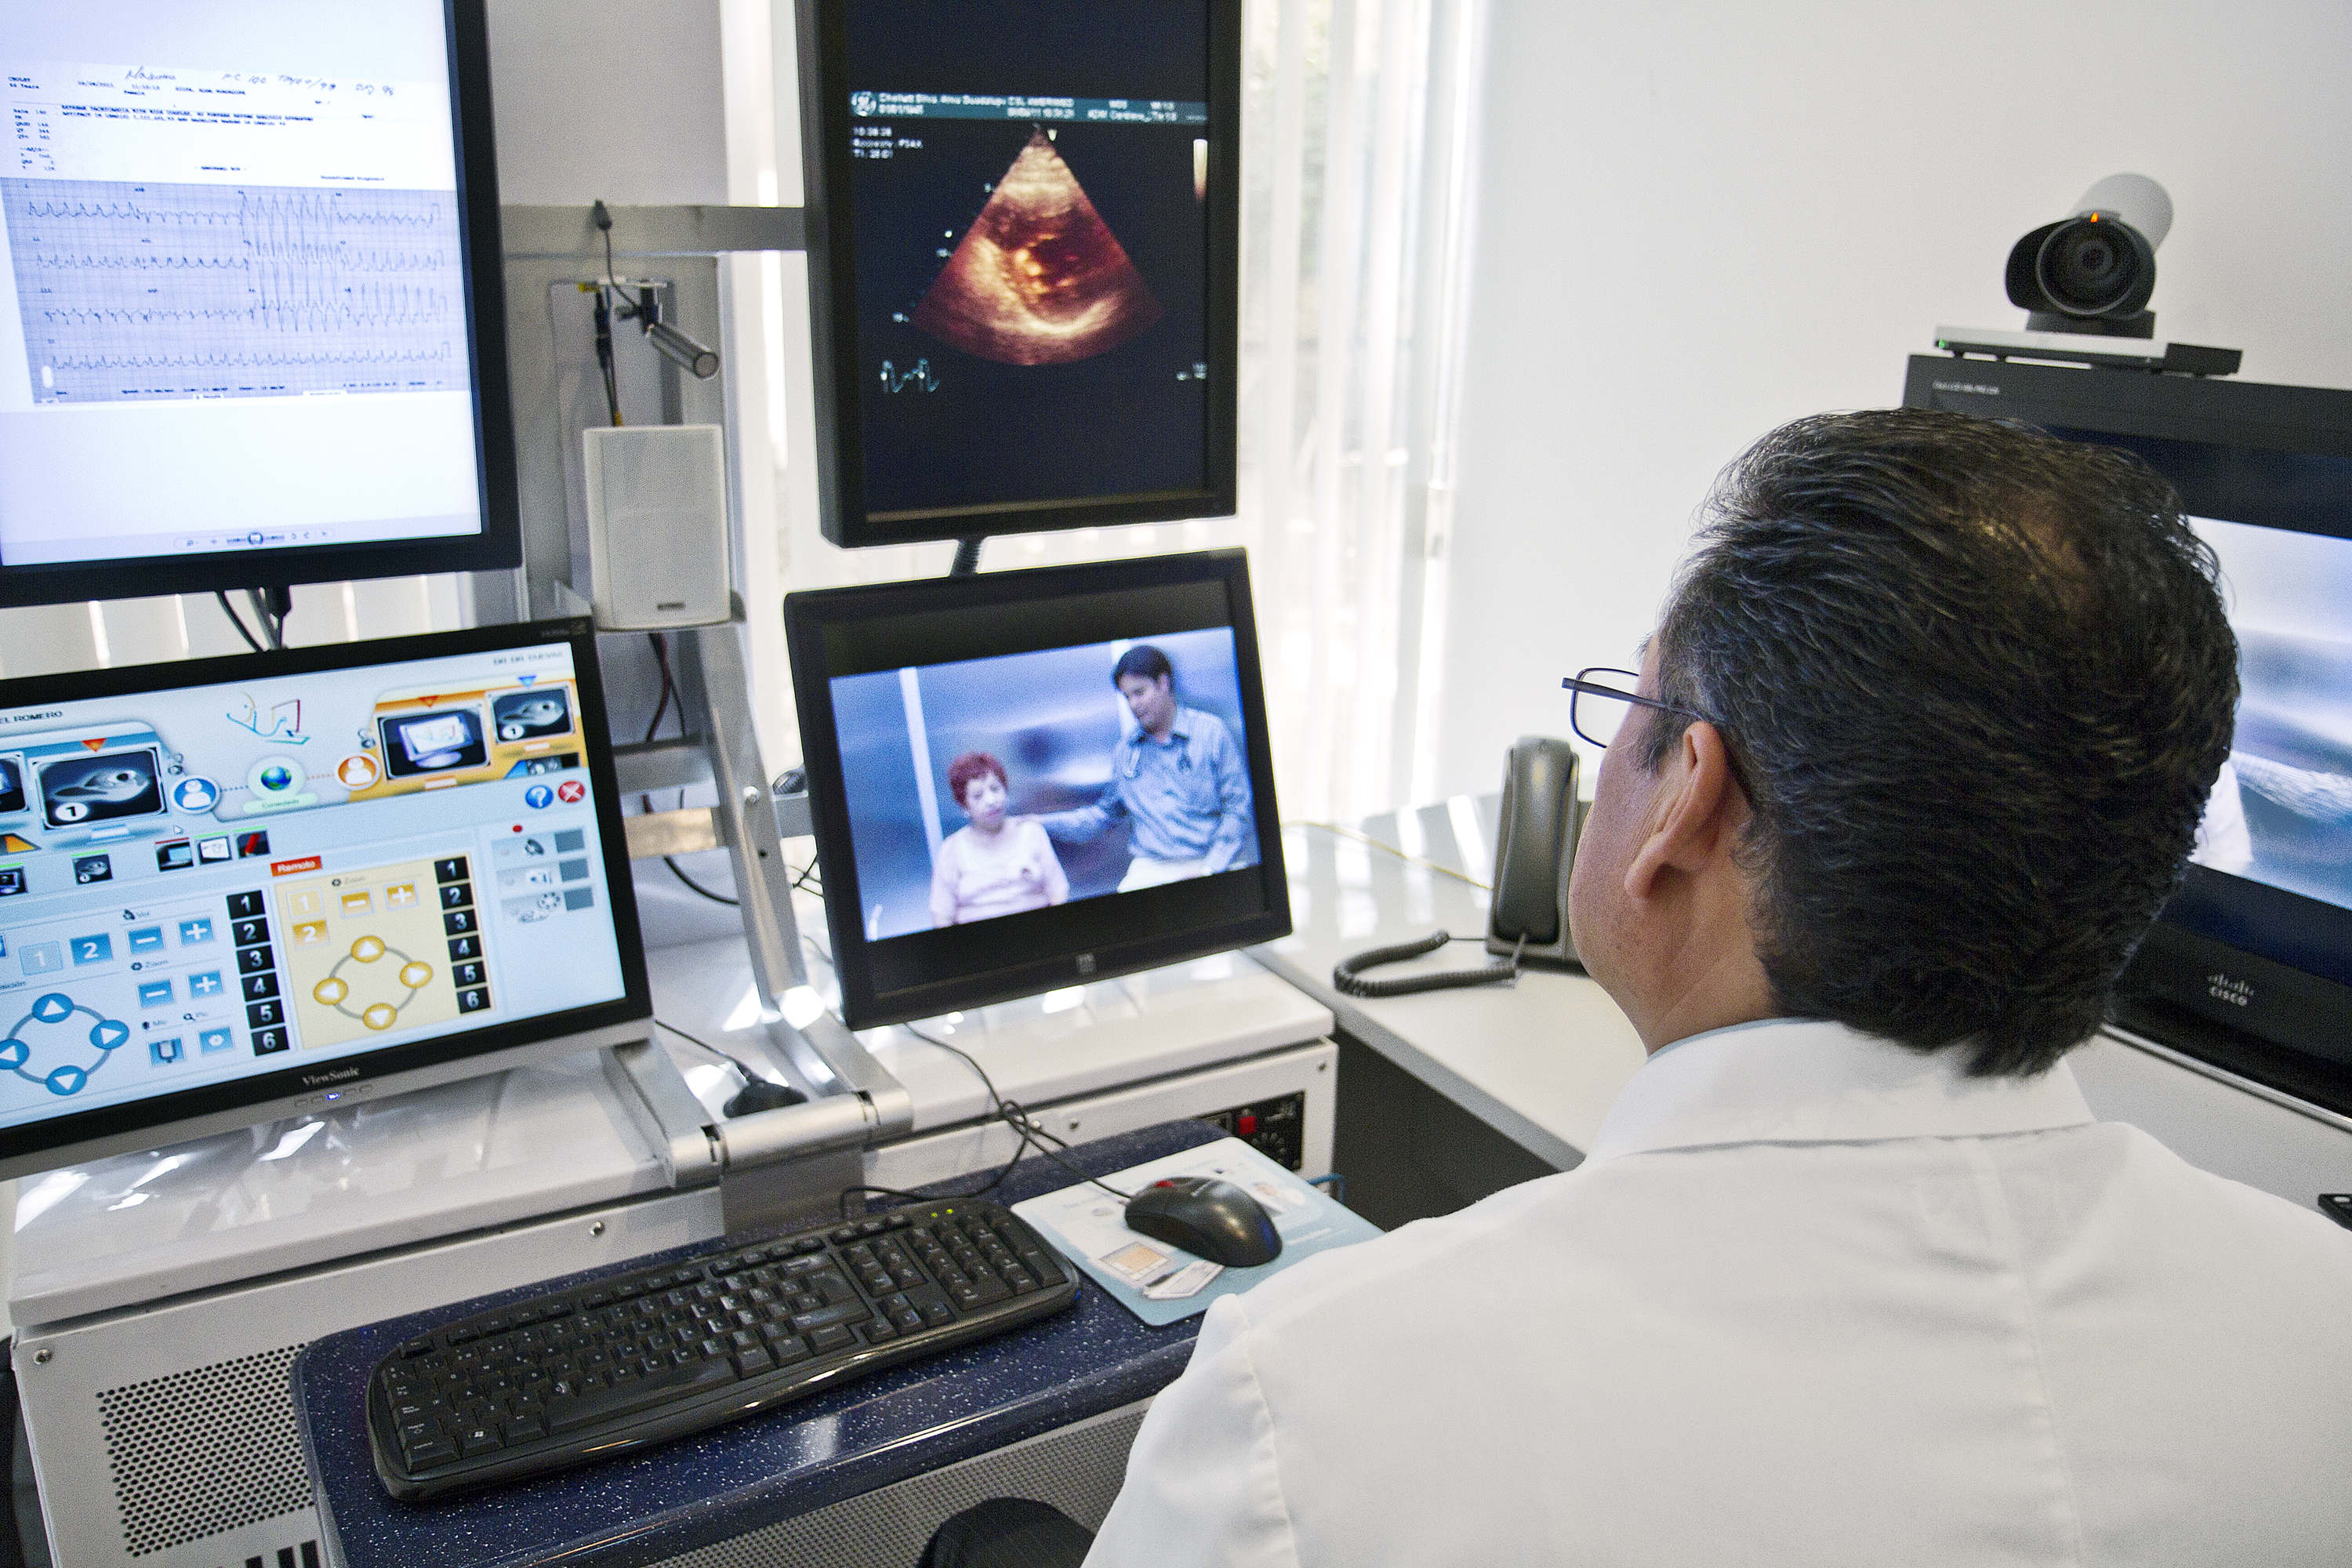 Telemedicine Market 2019 Report Study: Global Industry Size, Share, Technology Advancement, Business SWOT Analysis, Key Players statistics, Regional Forecast to 2023